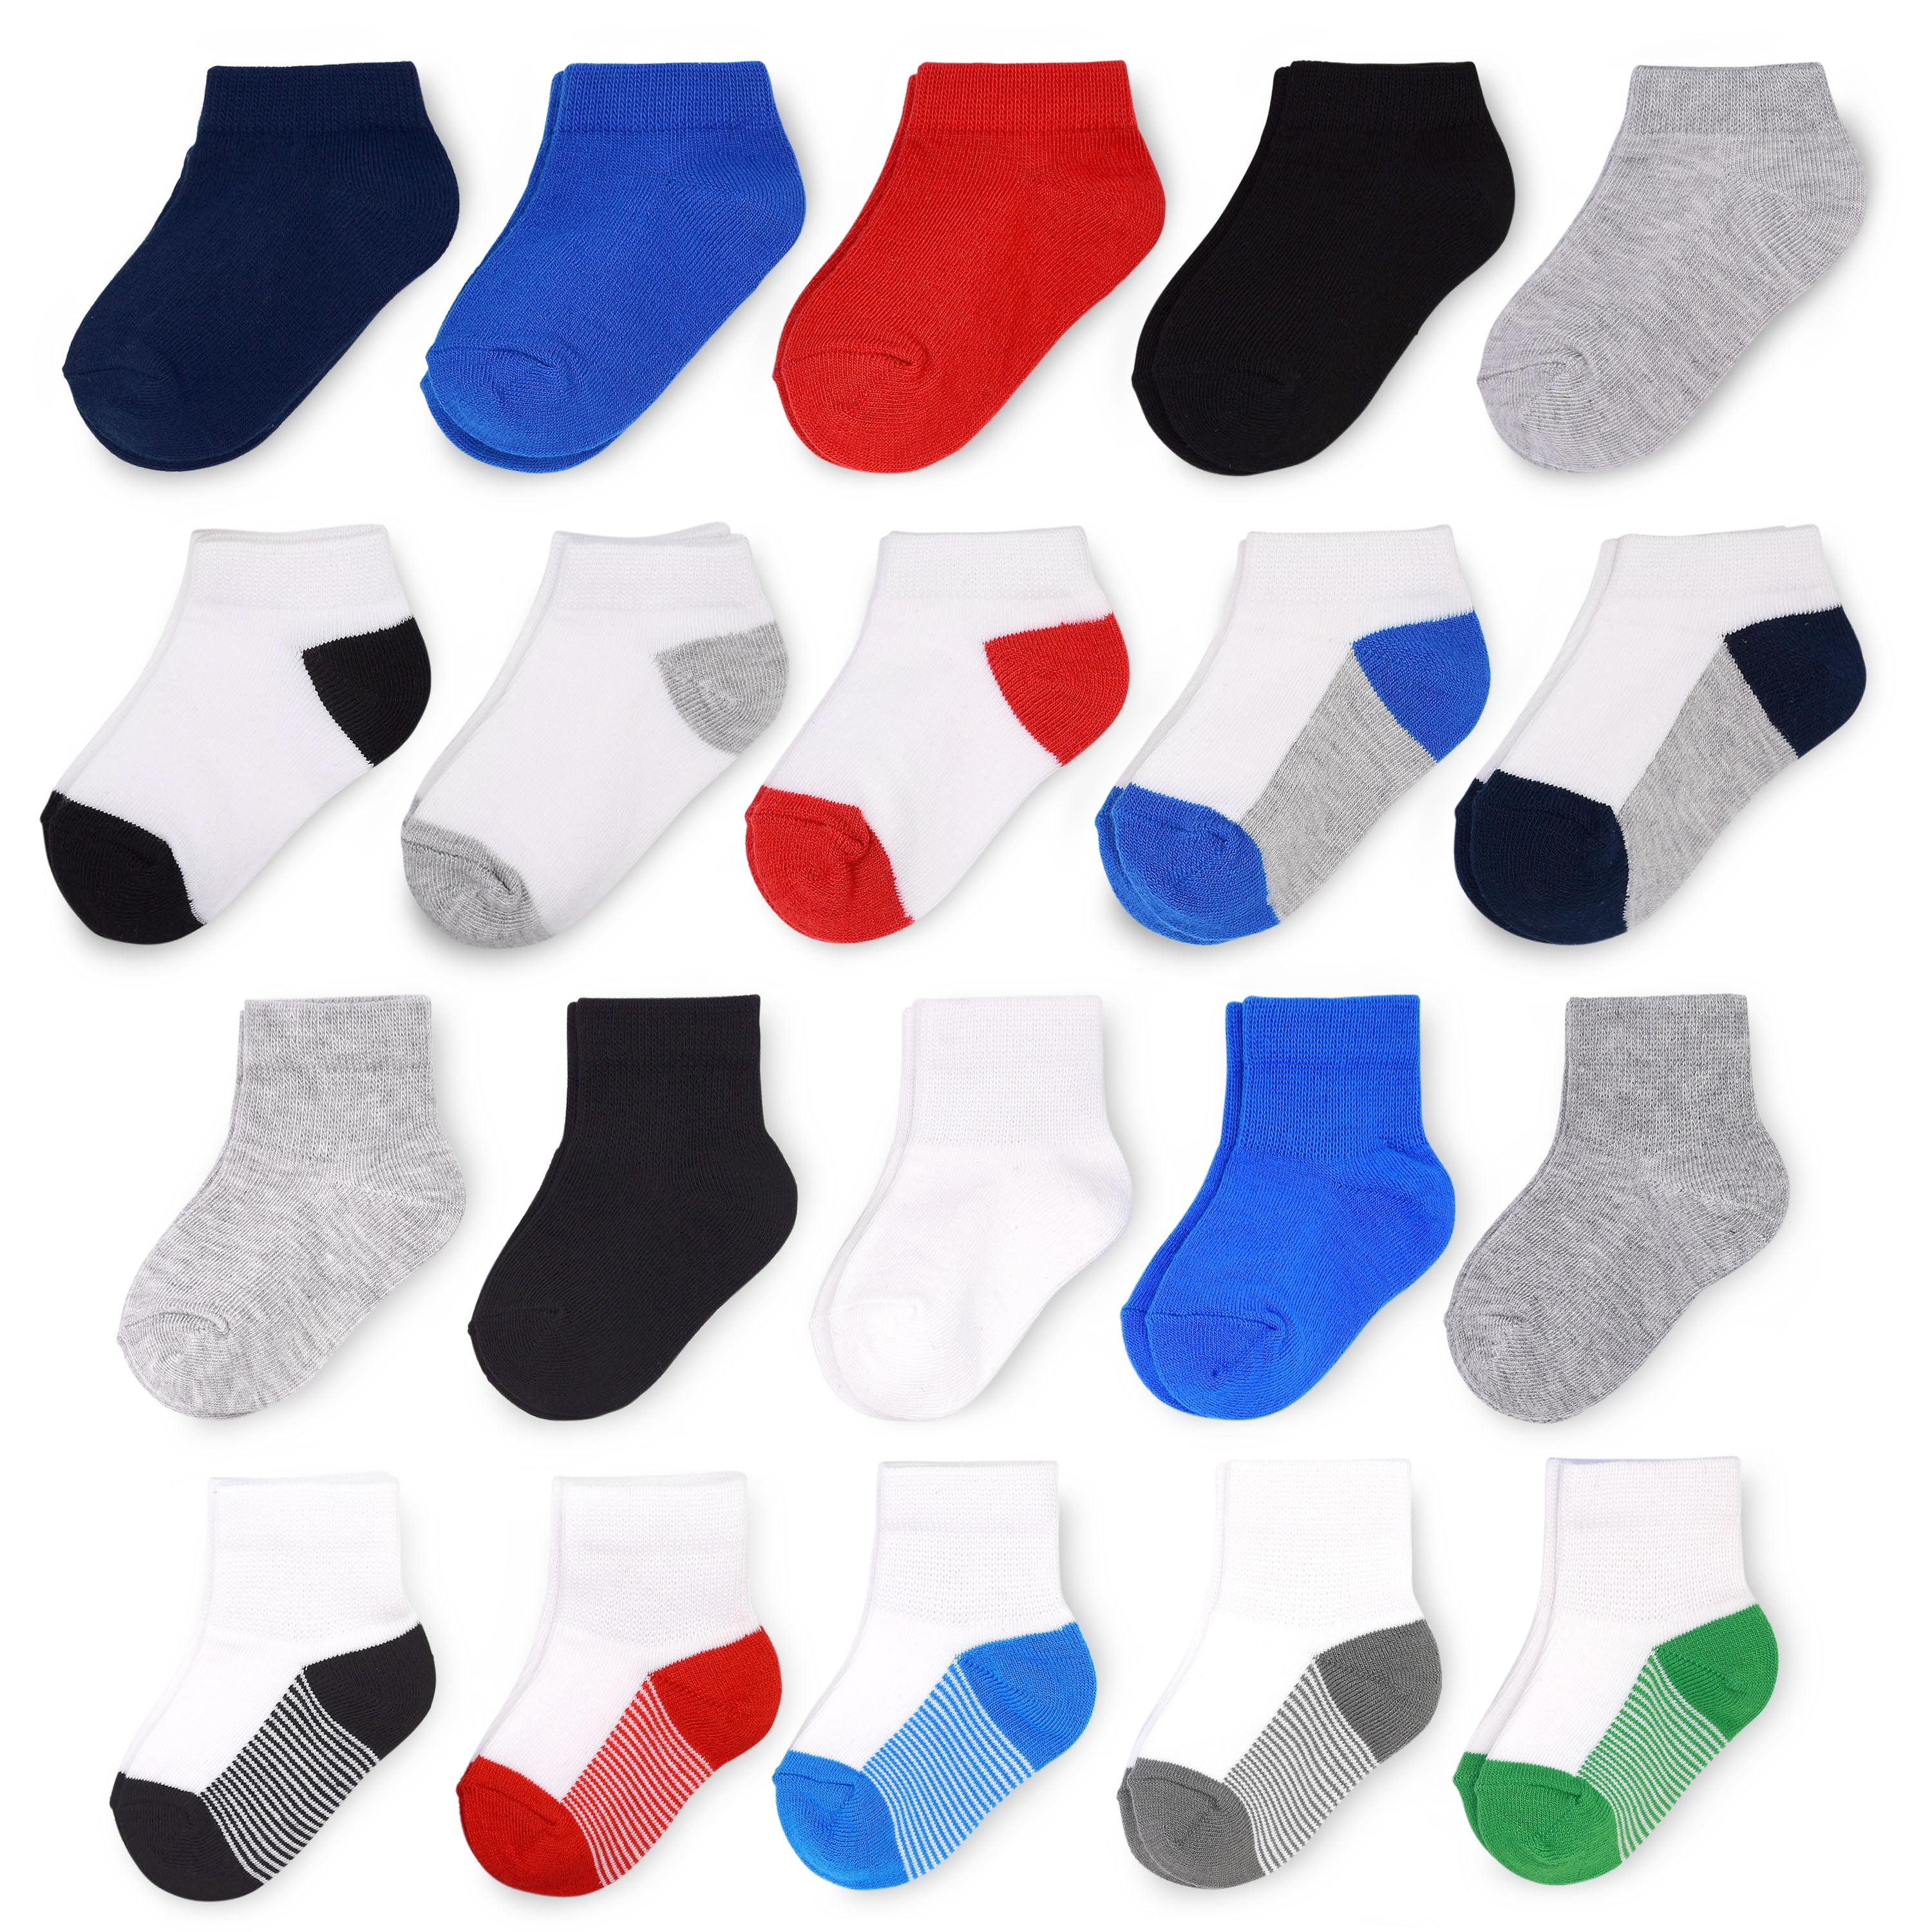 Fruit of the Loom Baby and Toddler Boy Low Cut and Ankle Socks, 20-Pack ...